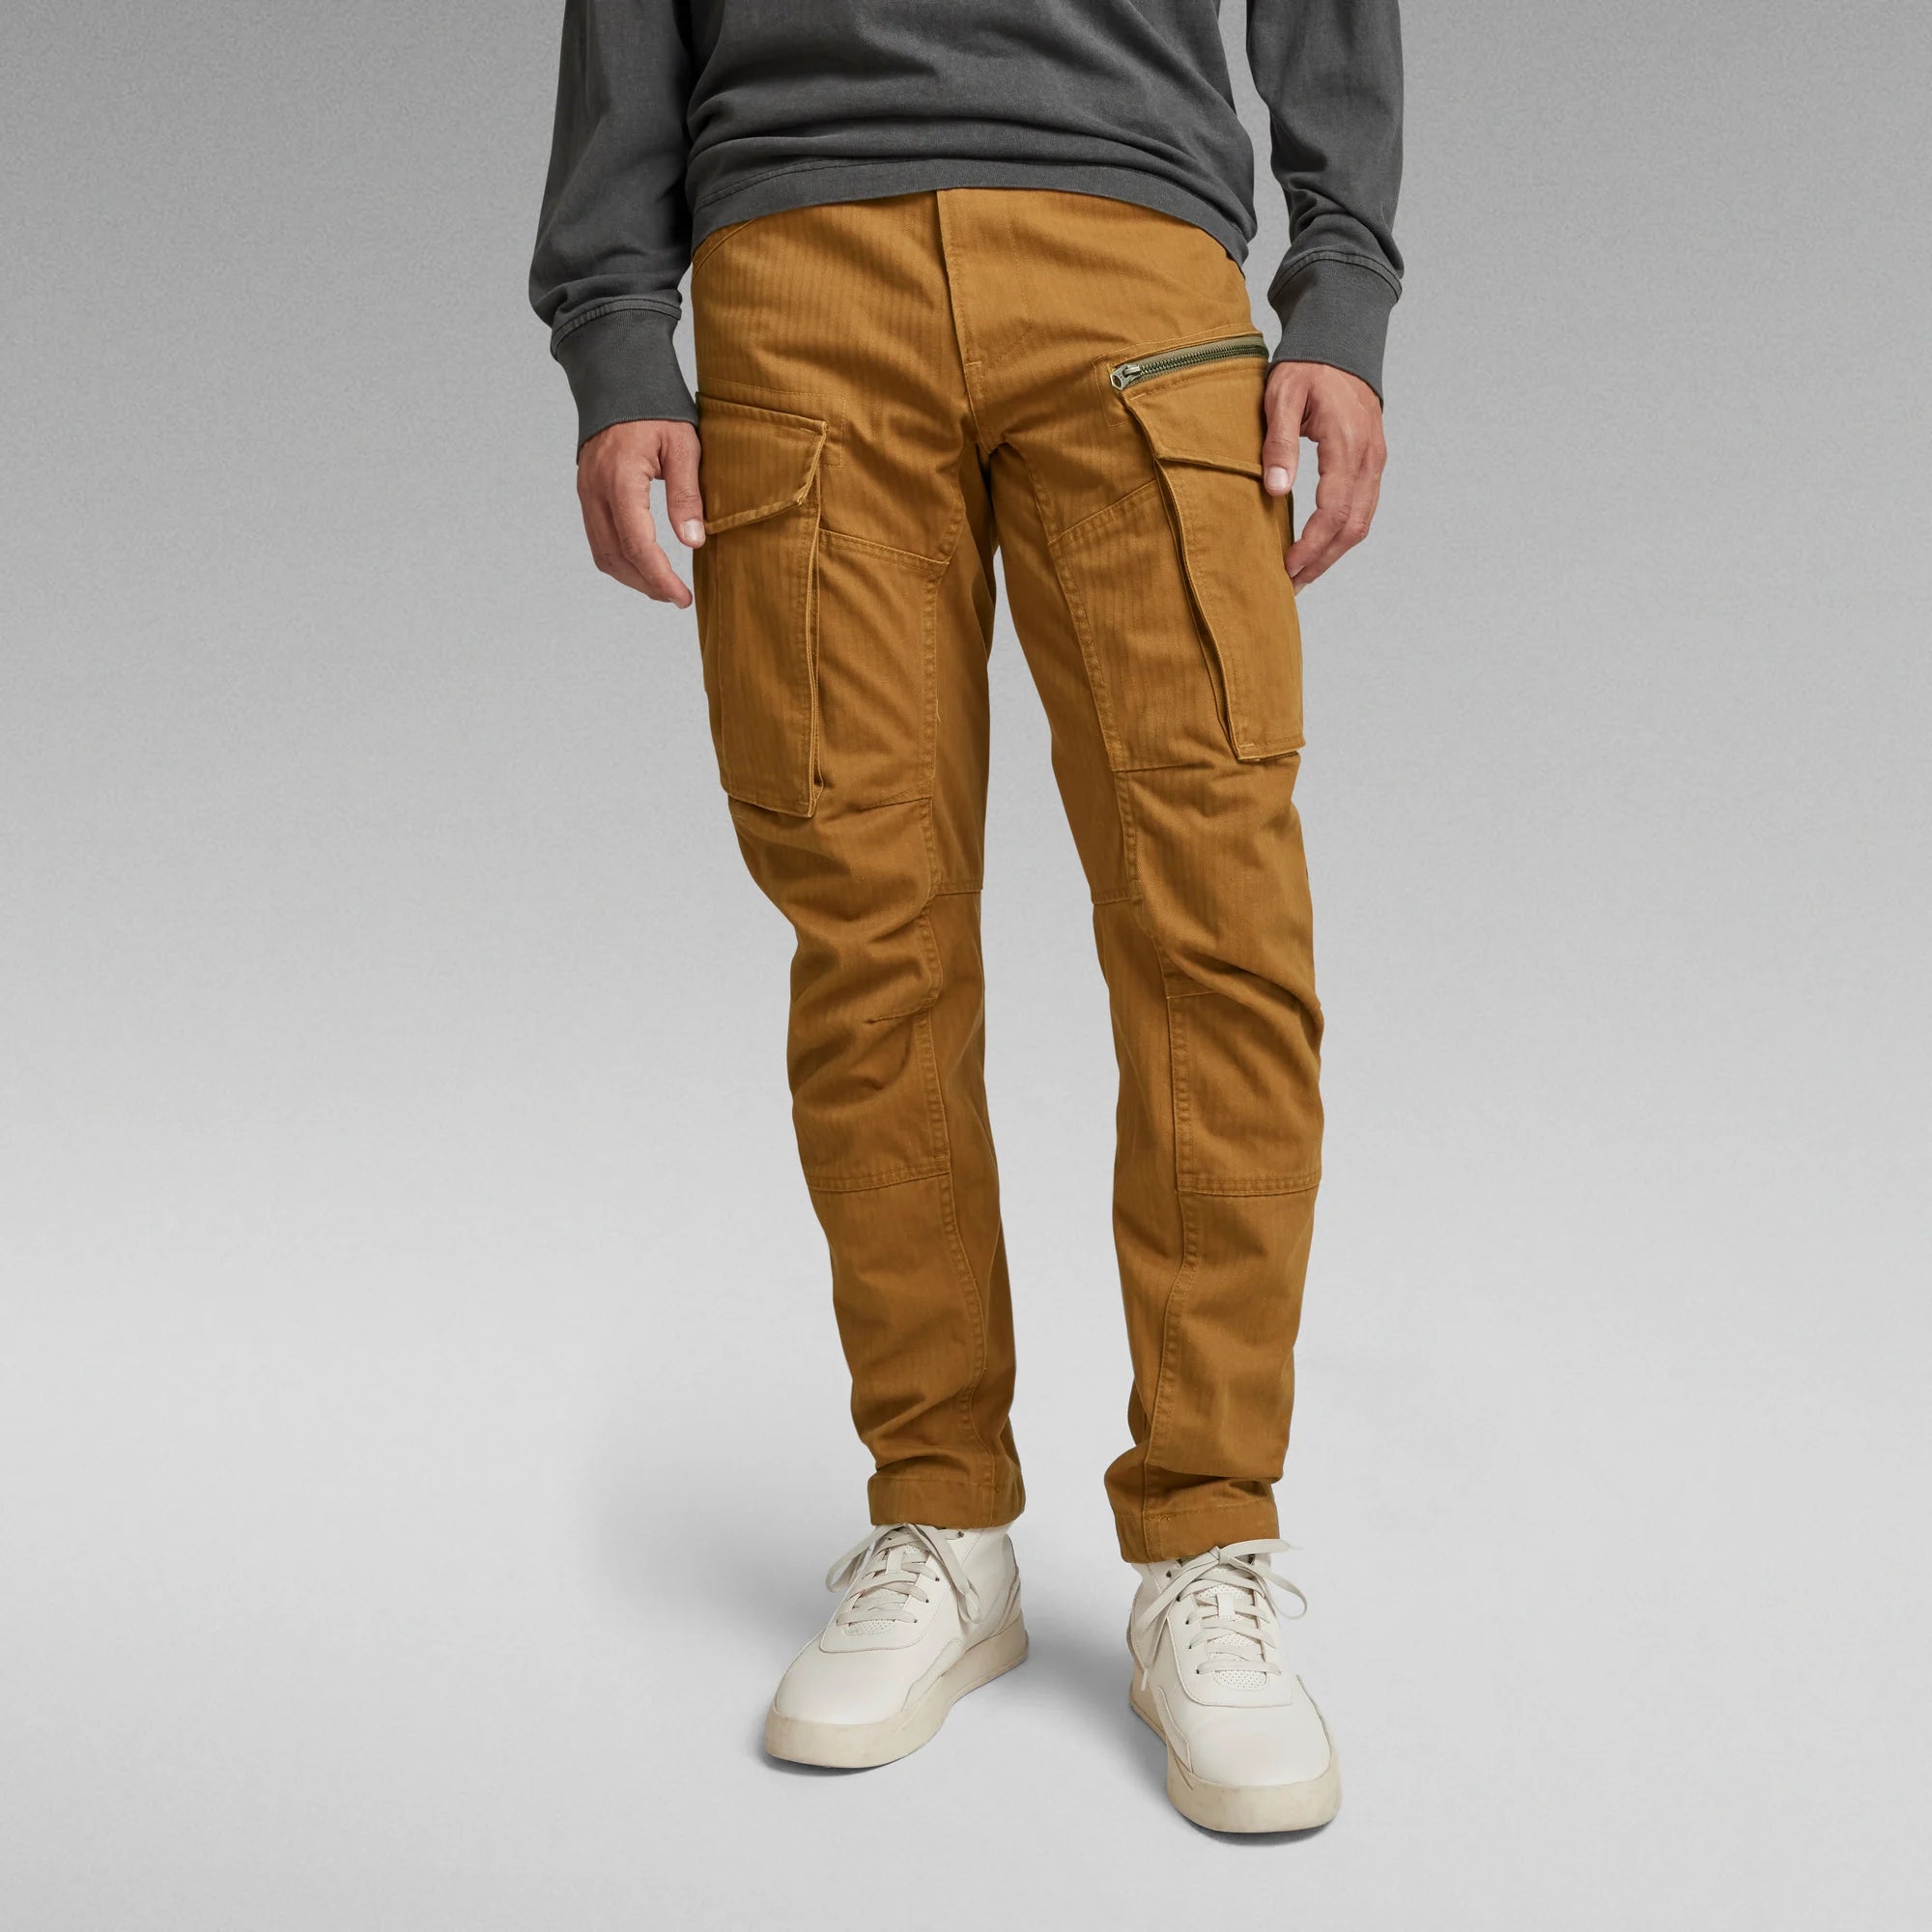 Buy Off white Trousers & Pants for Men by G STAR RAW Online | Ajio.com